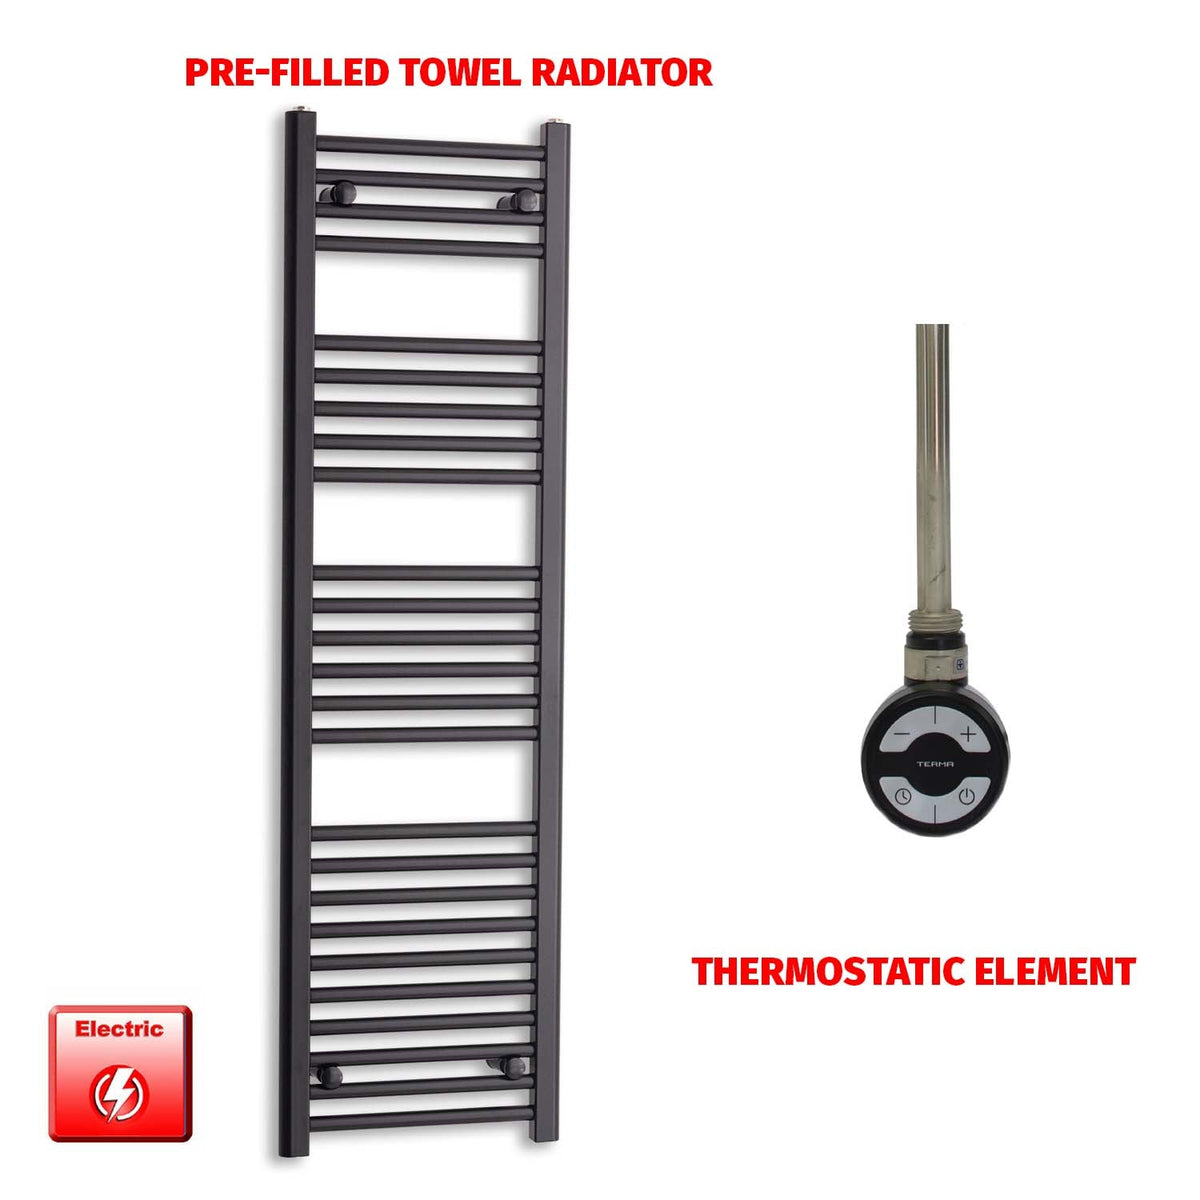 1400 x 450 Flat Black Pre-Filled Electric Heated Towel Radiator HTR MOA Thermostatic